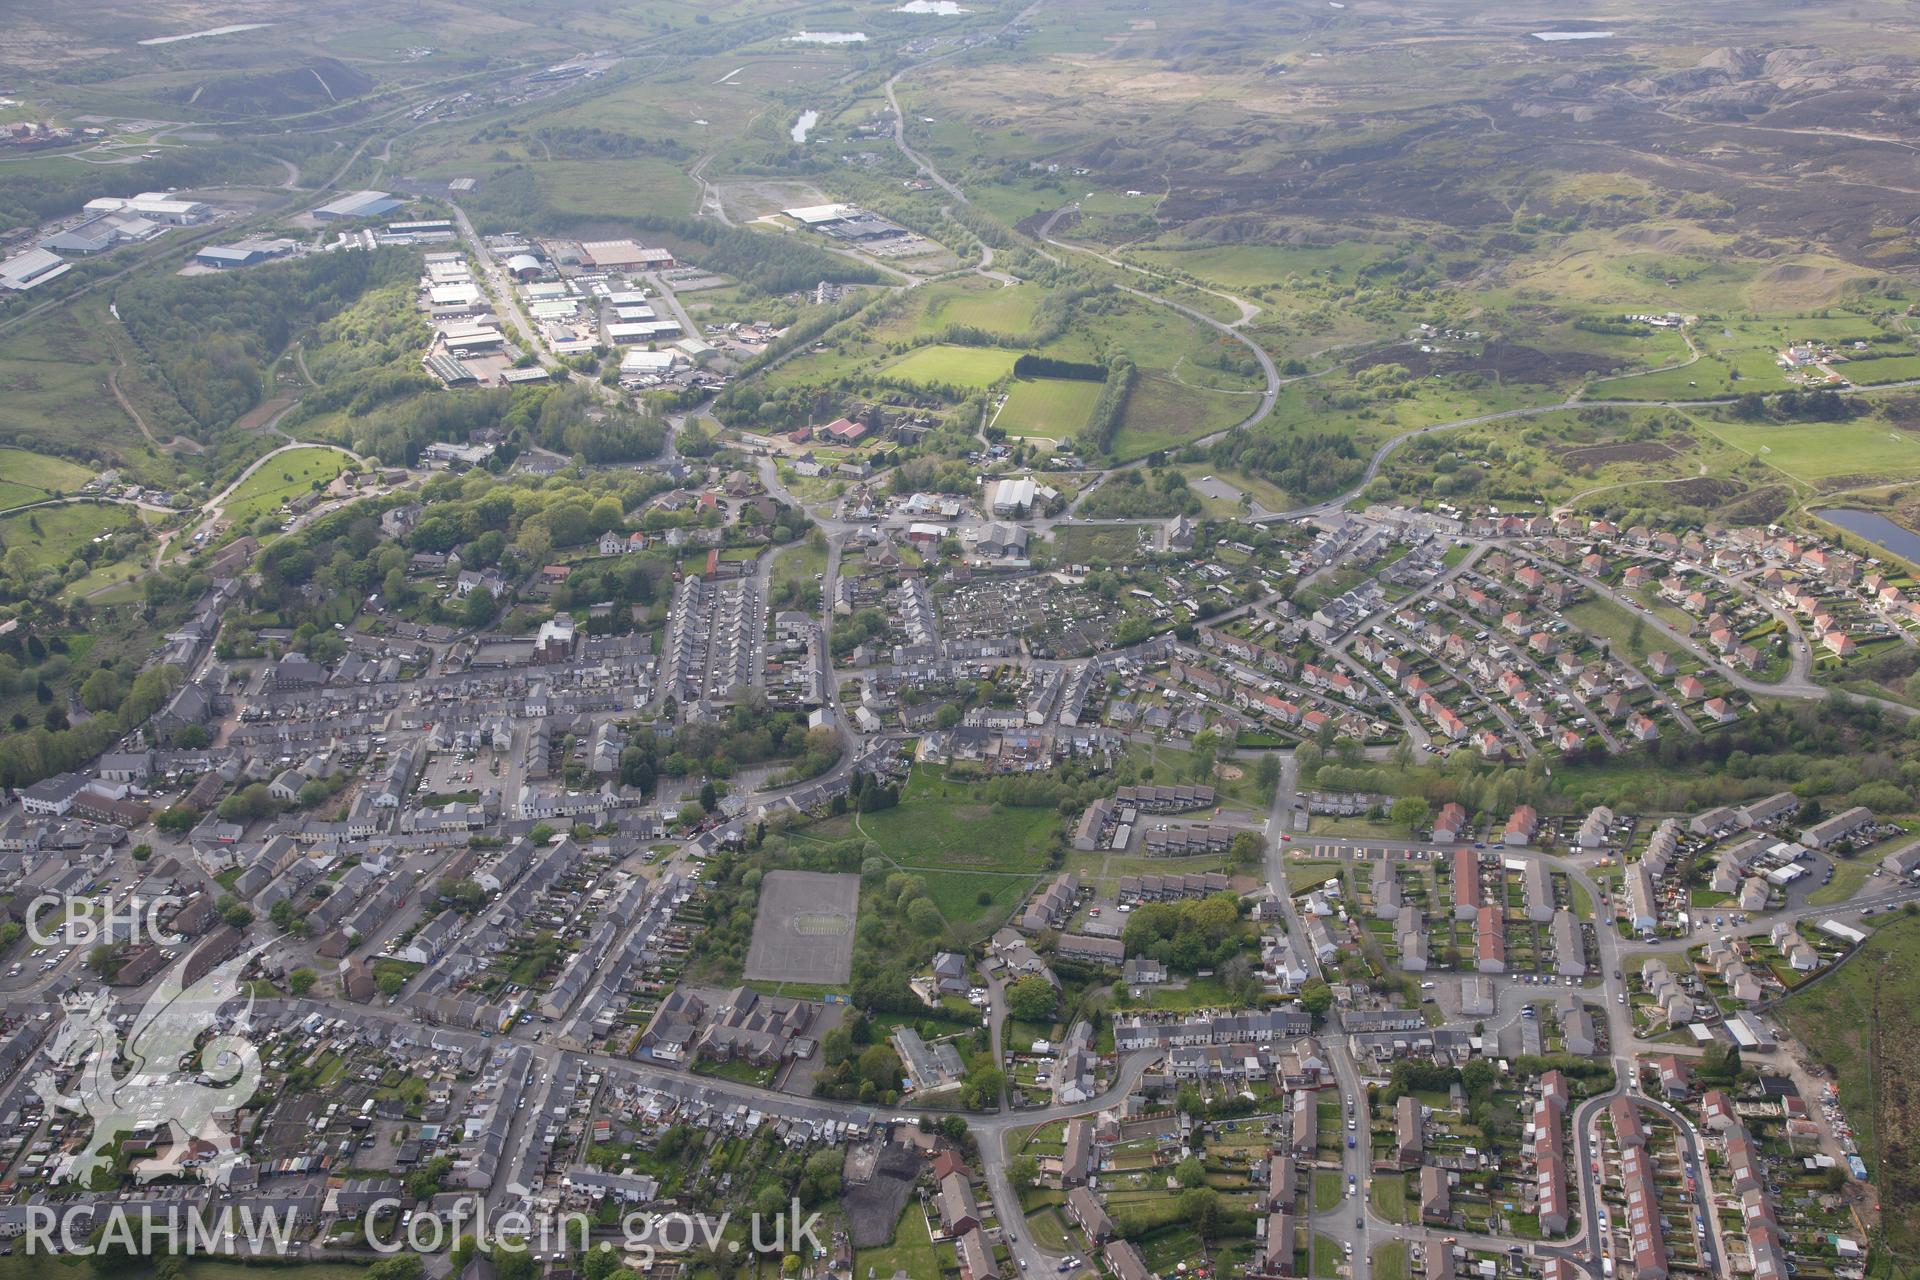 RCAHMW colour oblique photograph of Blaenavon, town, general view from south-east. Taken by Toby Driver on 22/05/2012.